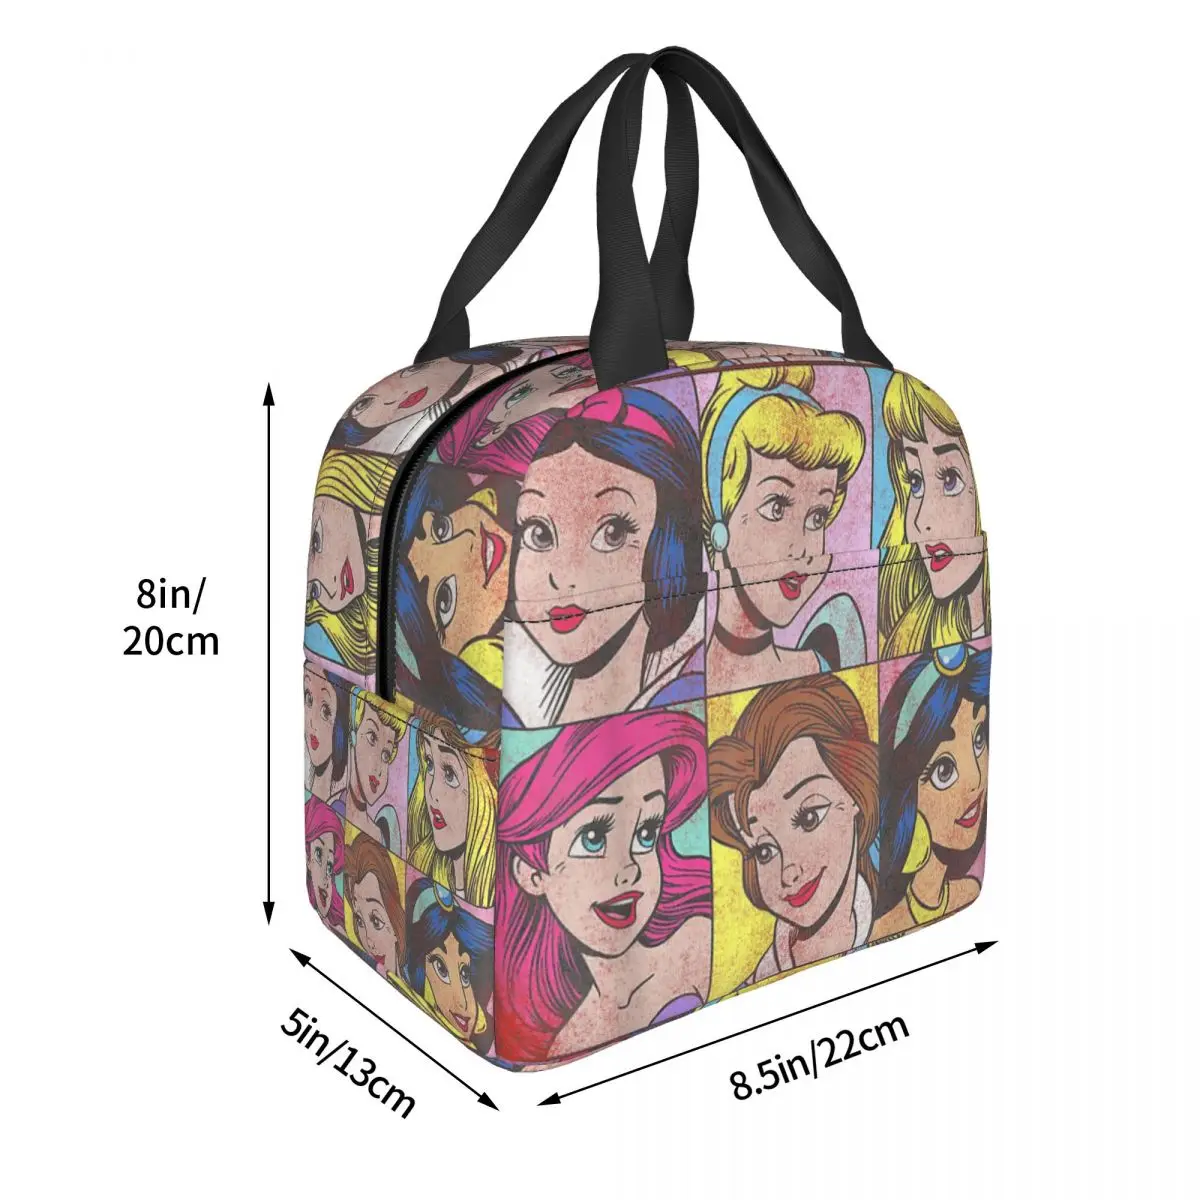 https://ae01.alicdn.com/kf/S846210679cb046f18f5cd36b540b472fD/Disney-Princess-Insulated-Lunch-Bags-Leakproof-Pop-Art-Portraits-Box-Up-Meal-Container-Thermal-Bag-Tote.jpg